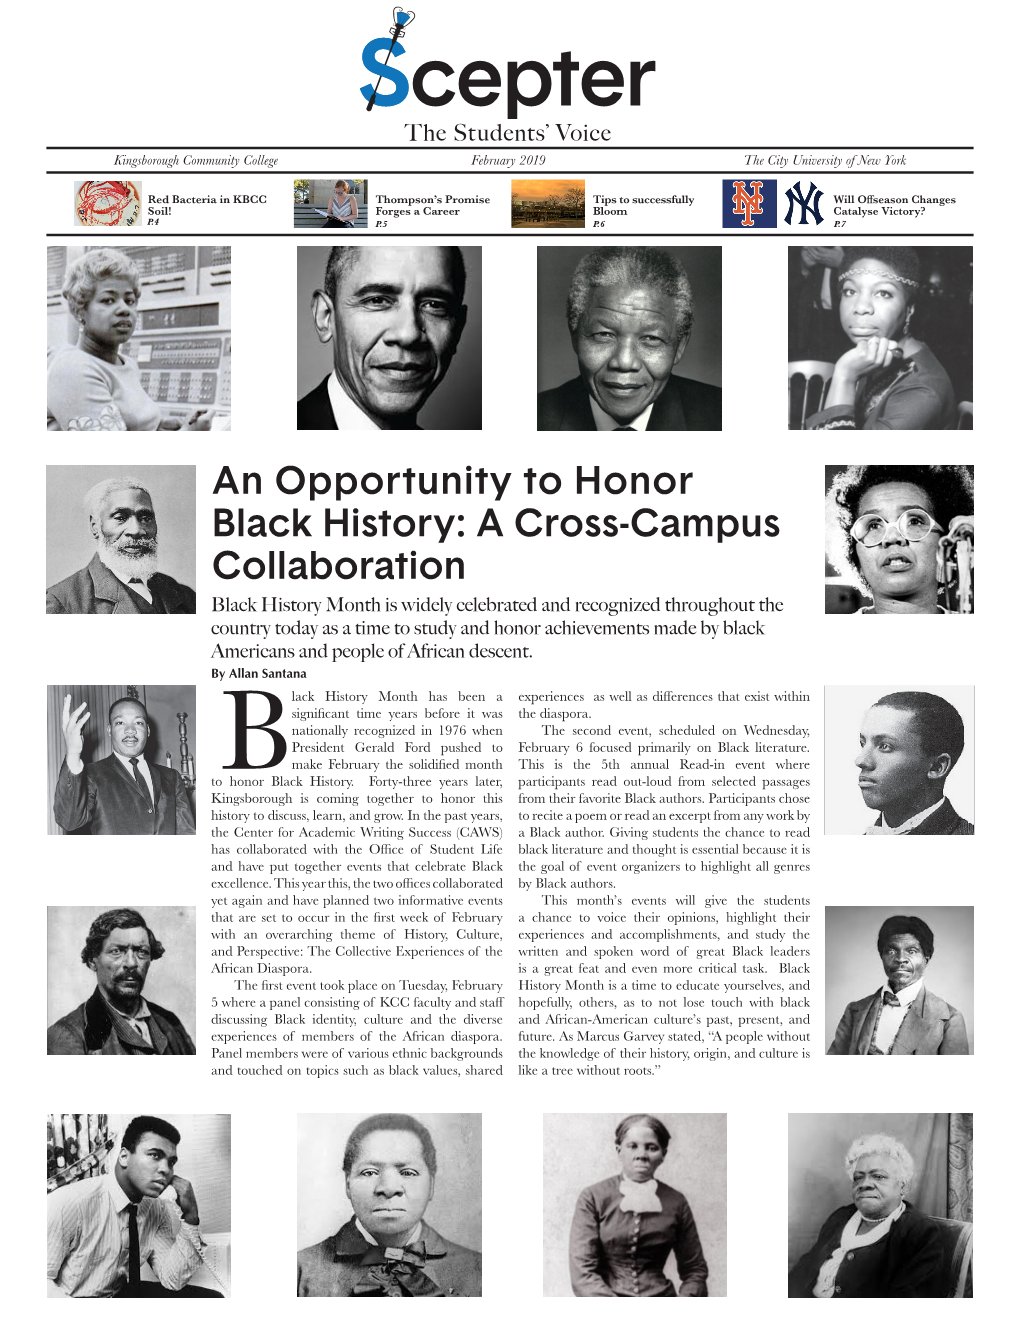 An Opportunity to Honor Black History